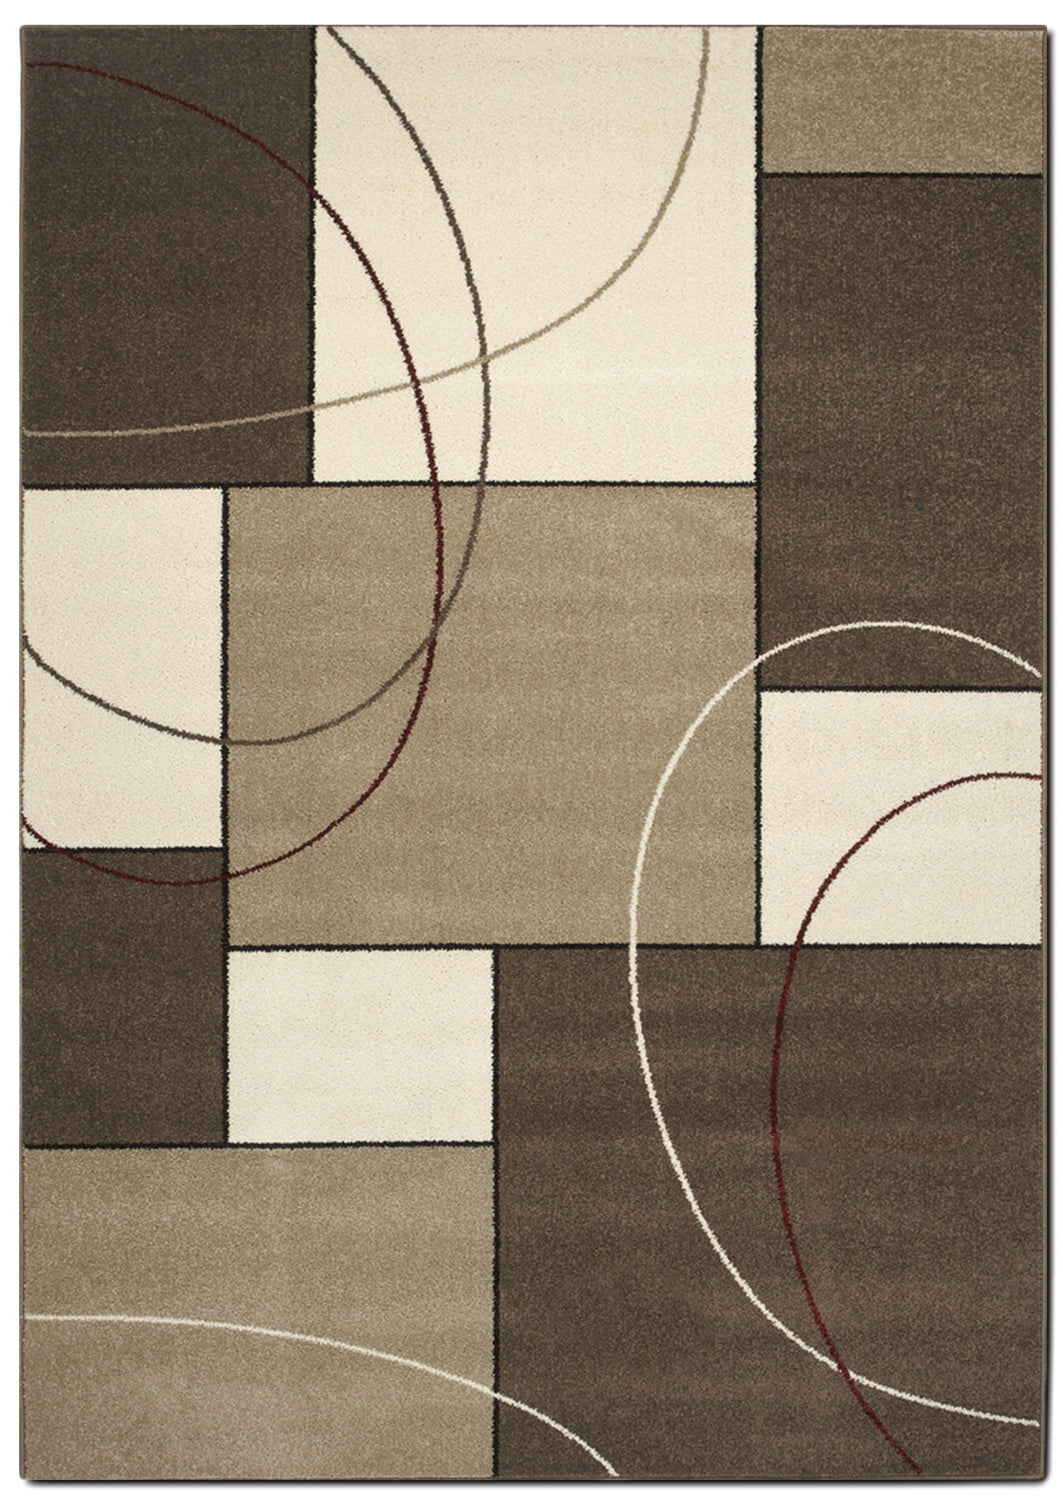 Casa Abstract 5' x 8' Area Rug - Cream and Taupe